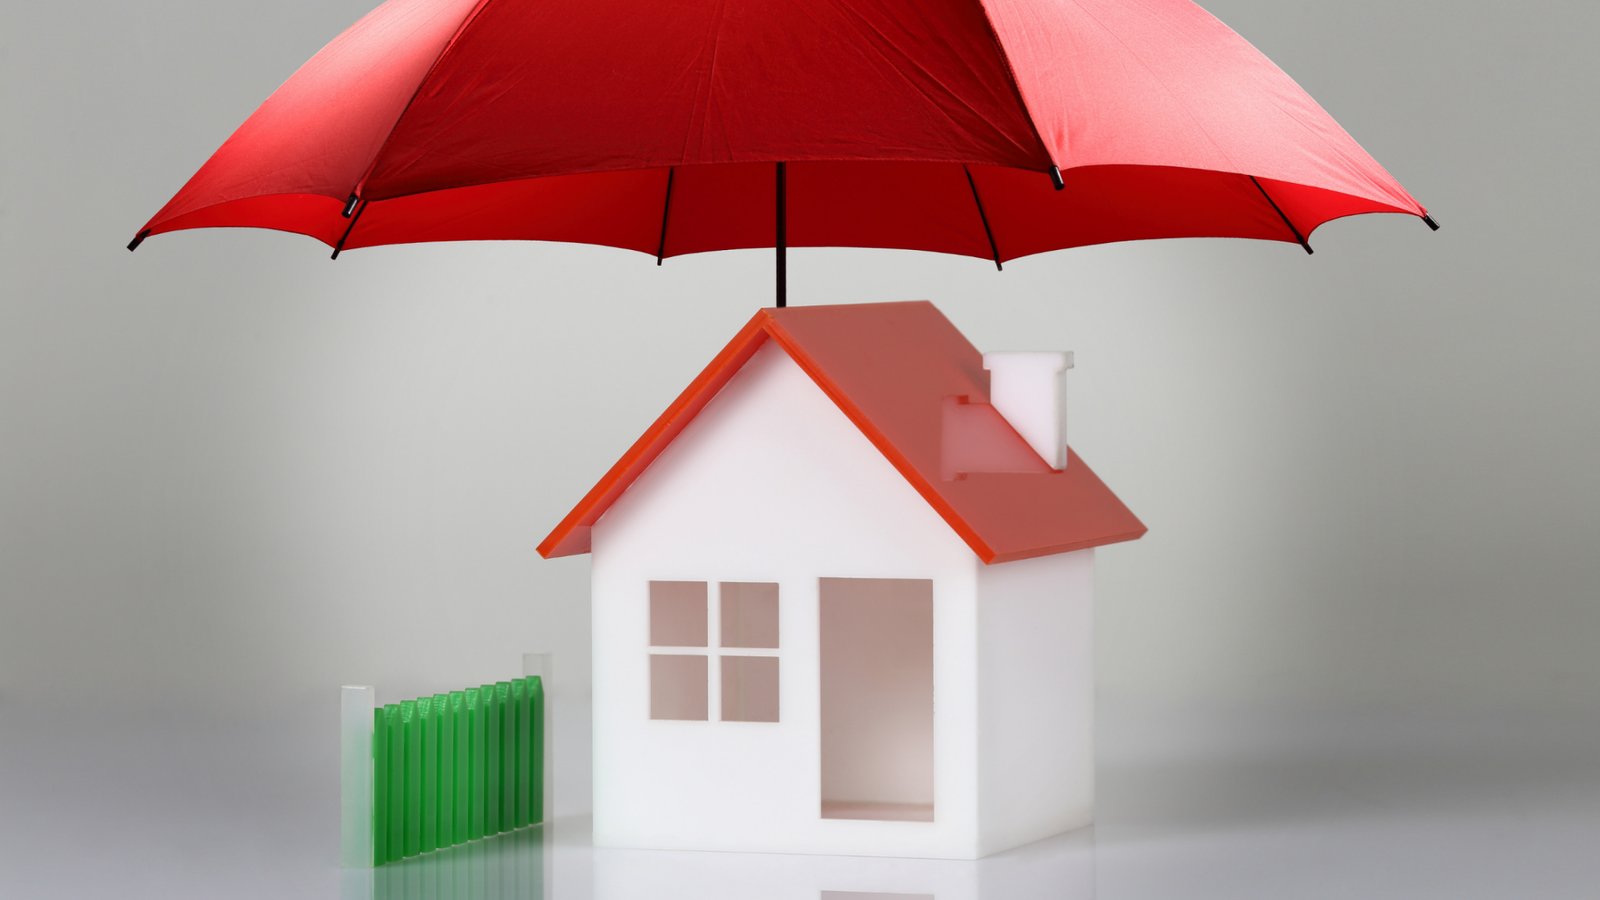 High risk homeowners insurance information